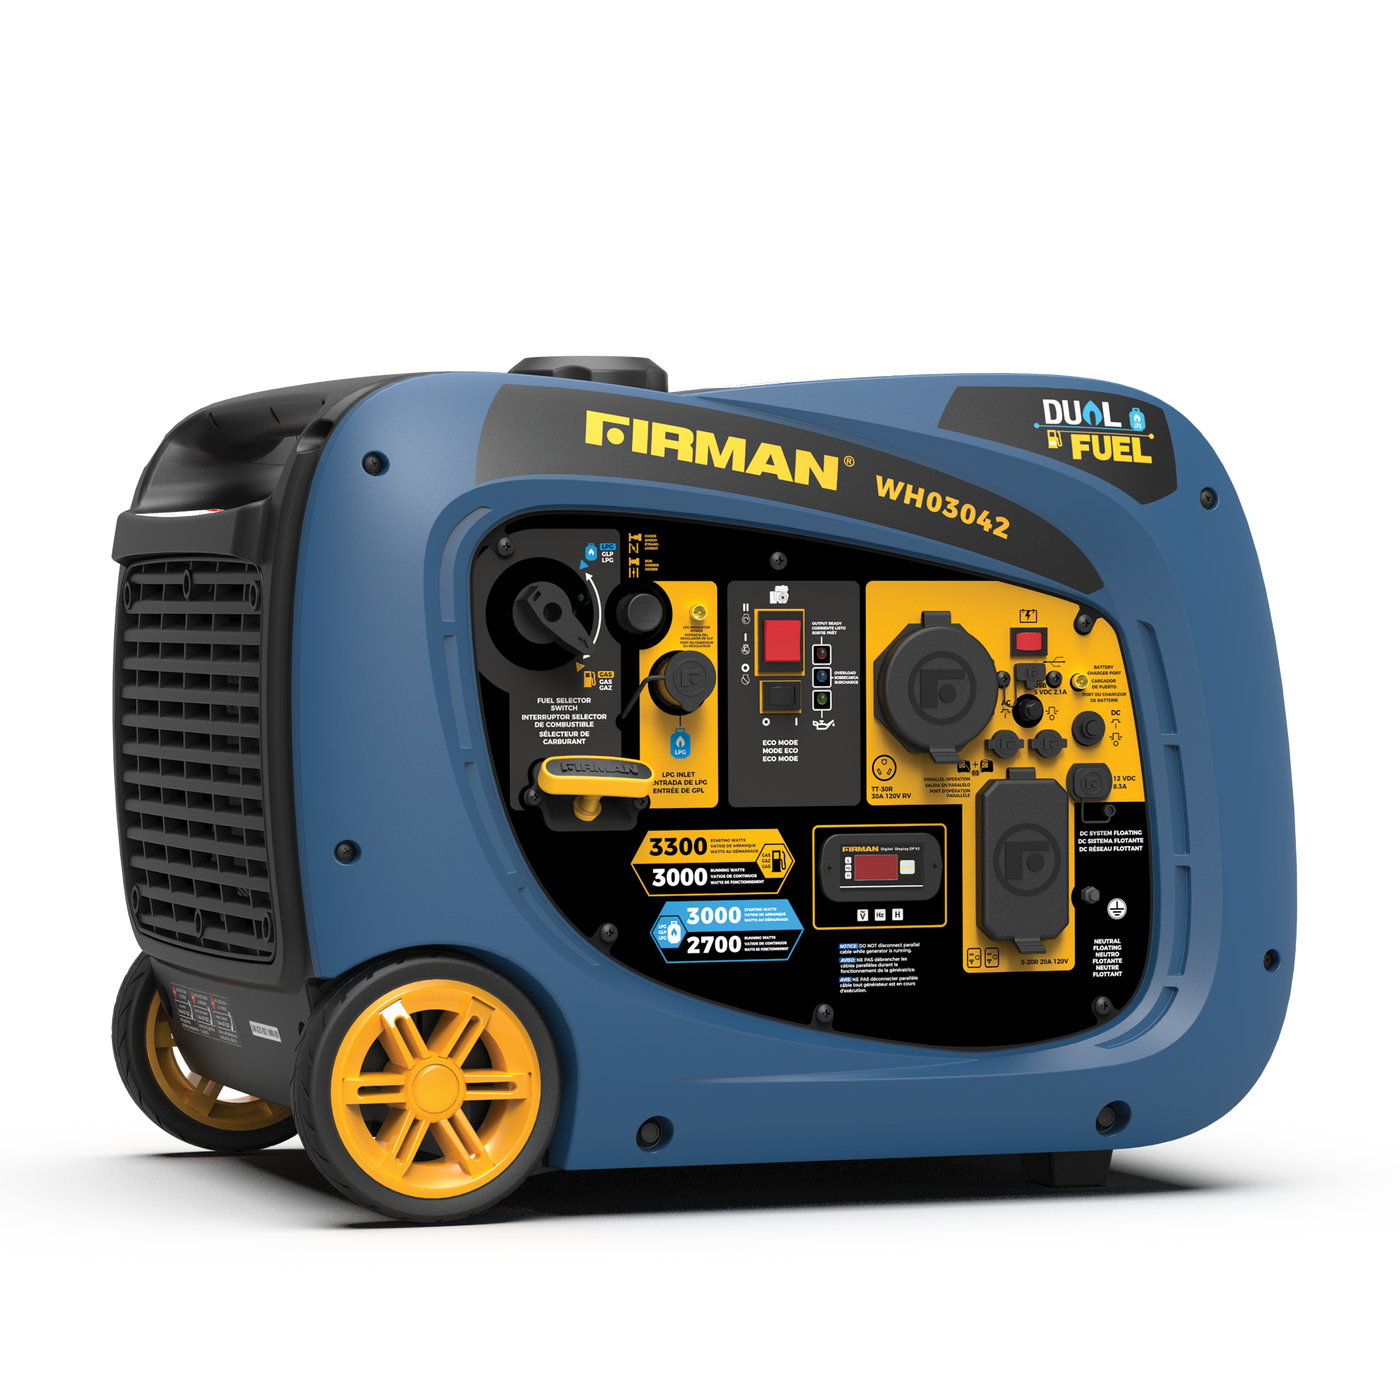 How Does a Portable Home Generator Work?